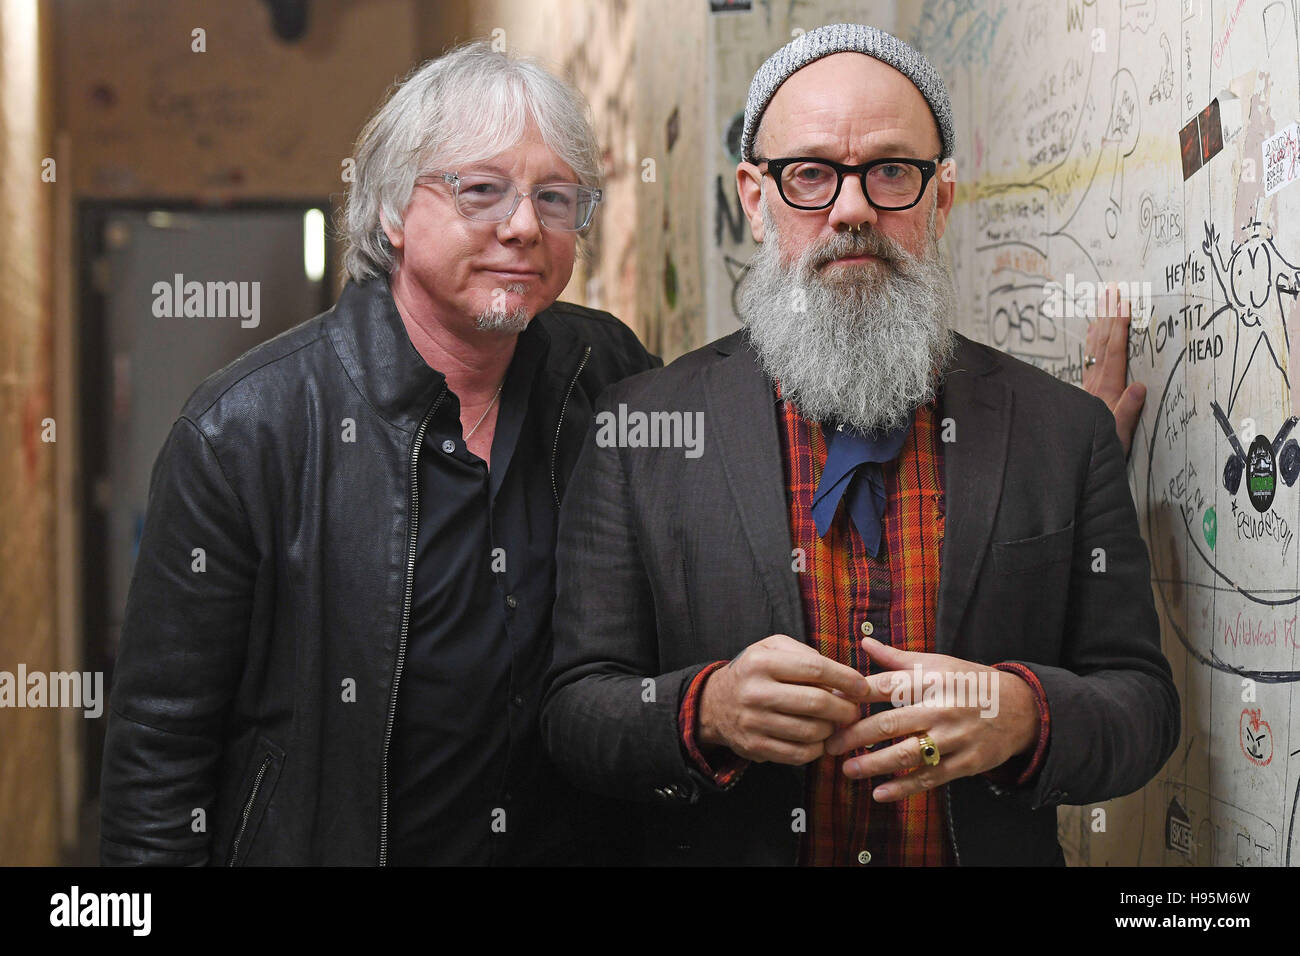 R.E.M.'s Mike Mills Looks Back on 'Up' and Why There's No Reunion Hope